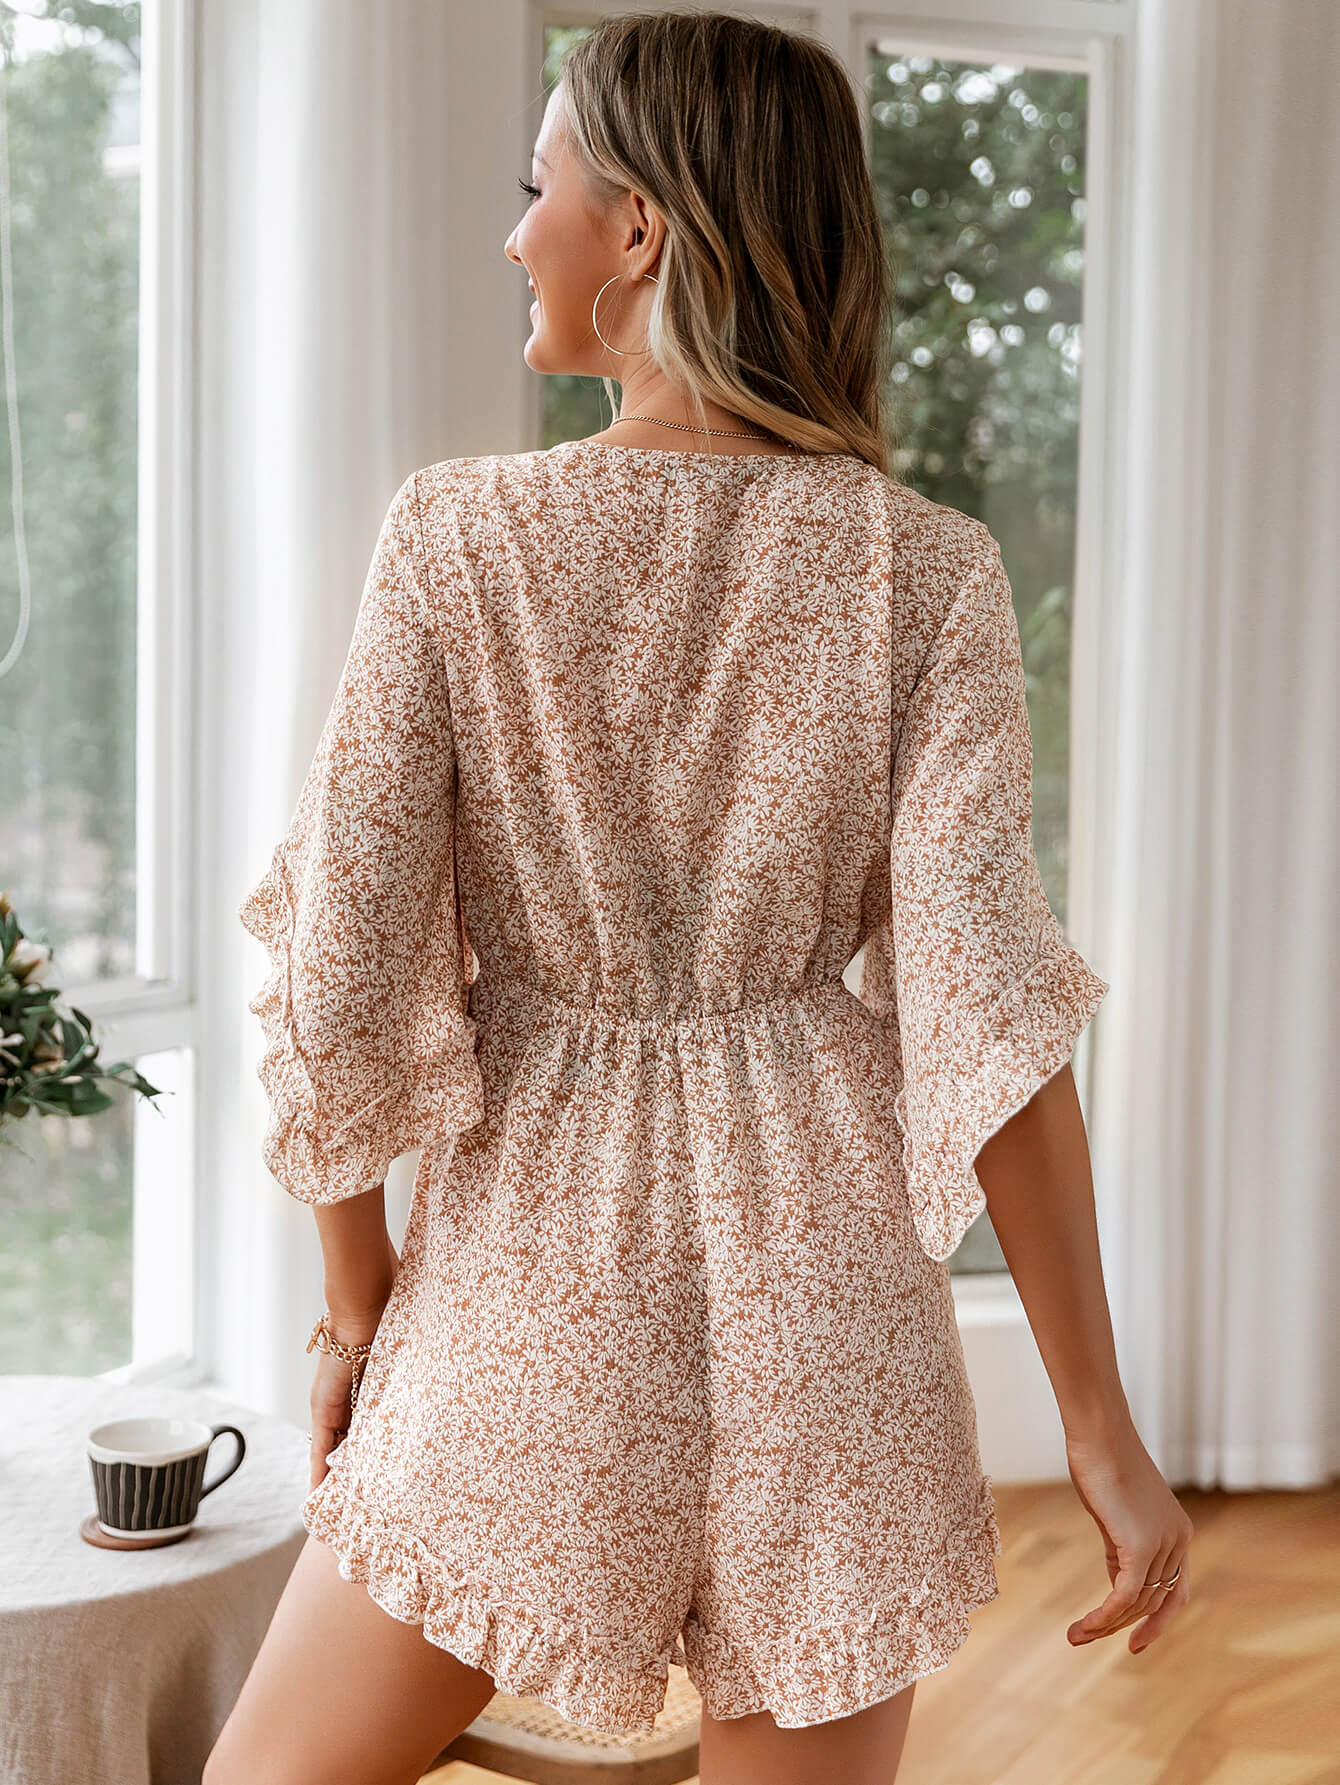 Ditsy Floral Bell Sleeve Tie-Front Romper - Fashion Girl Online Store